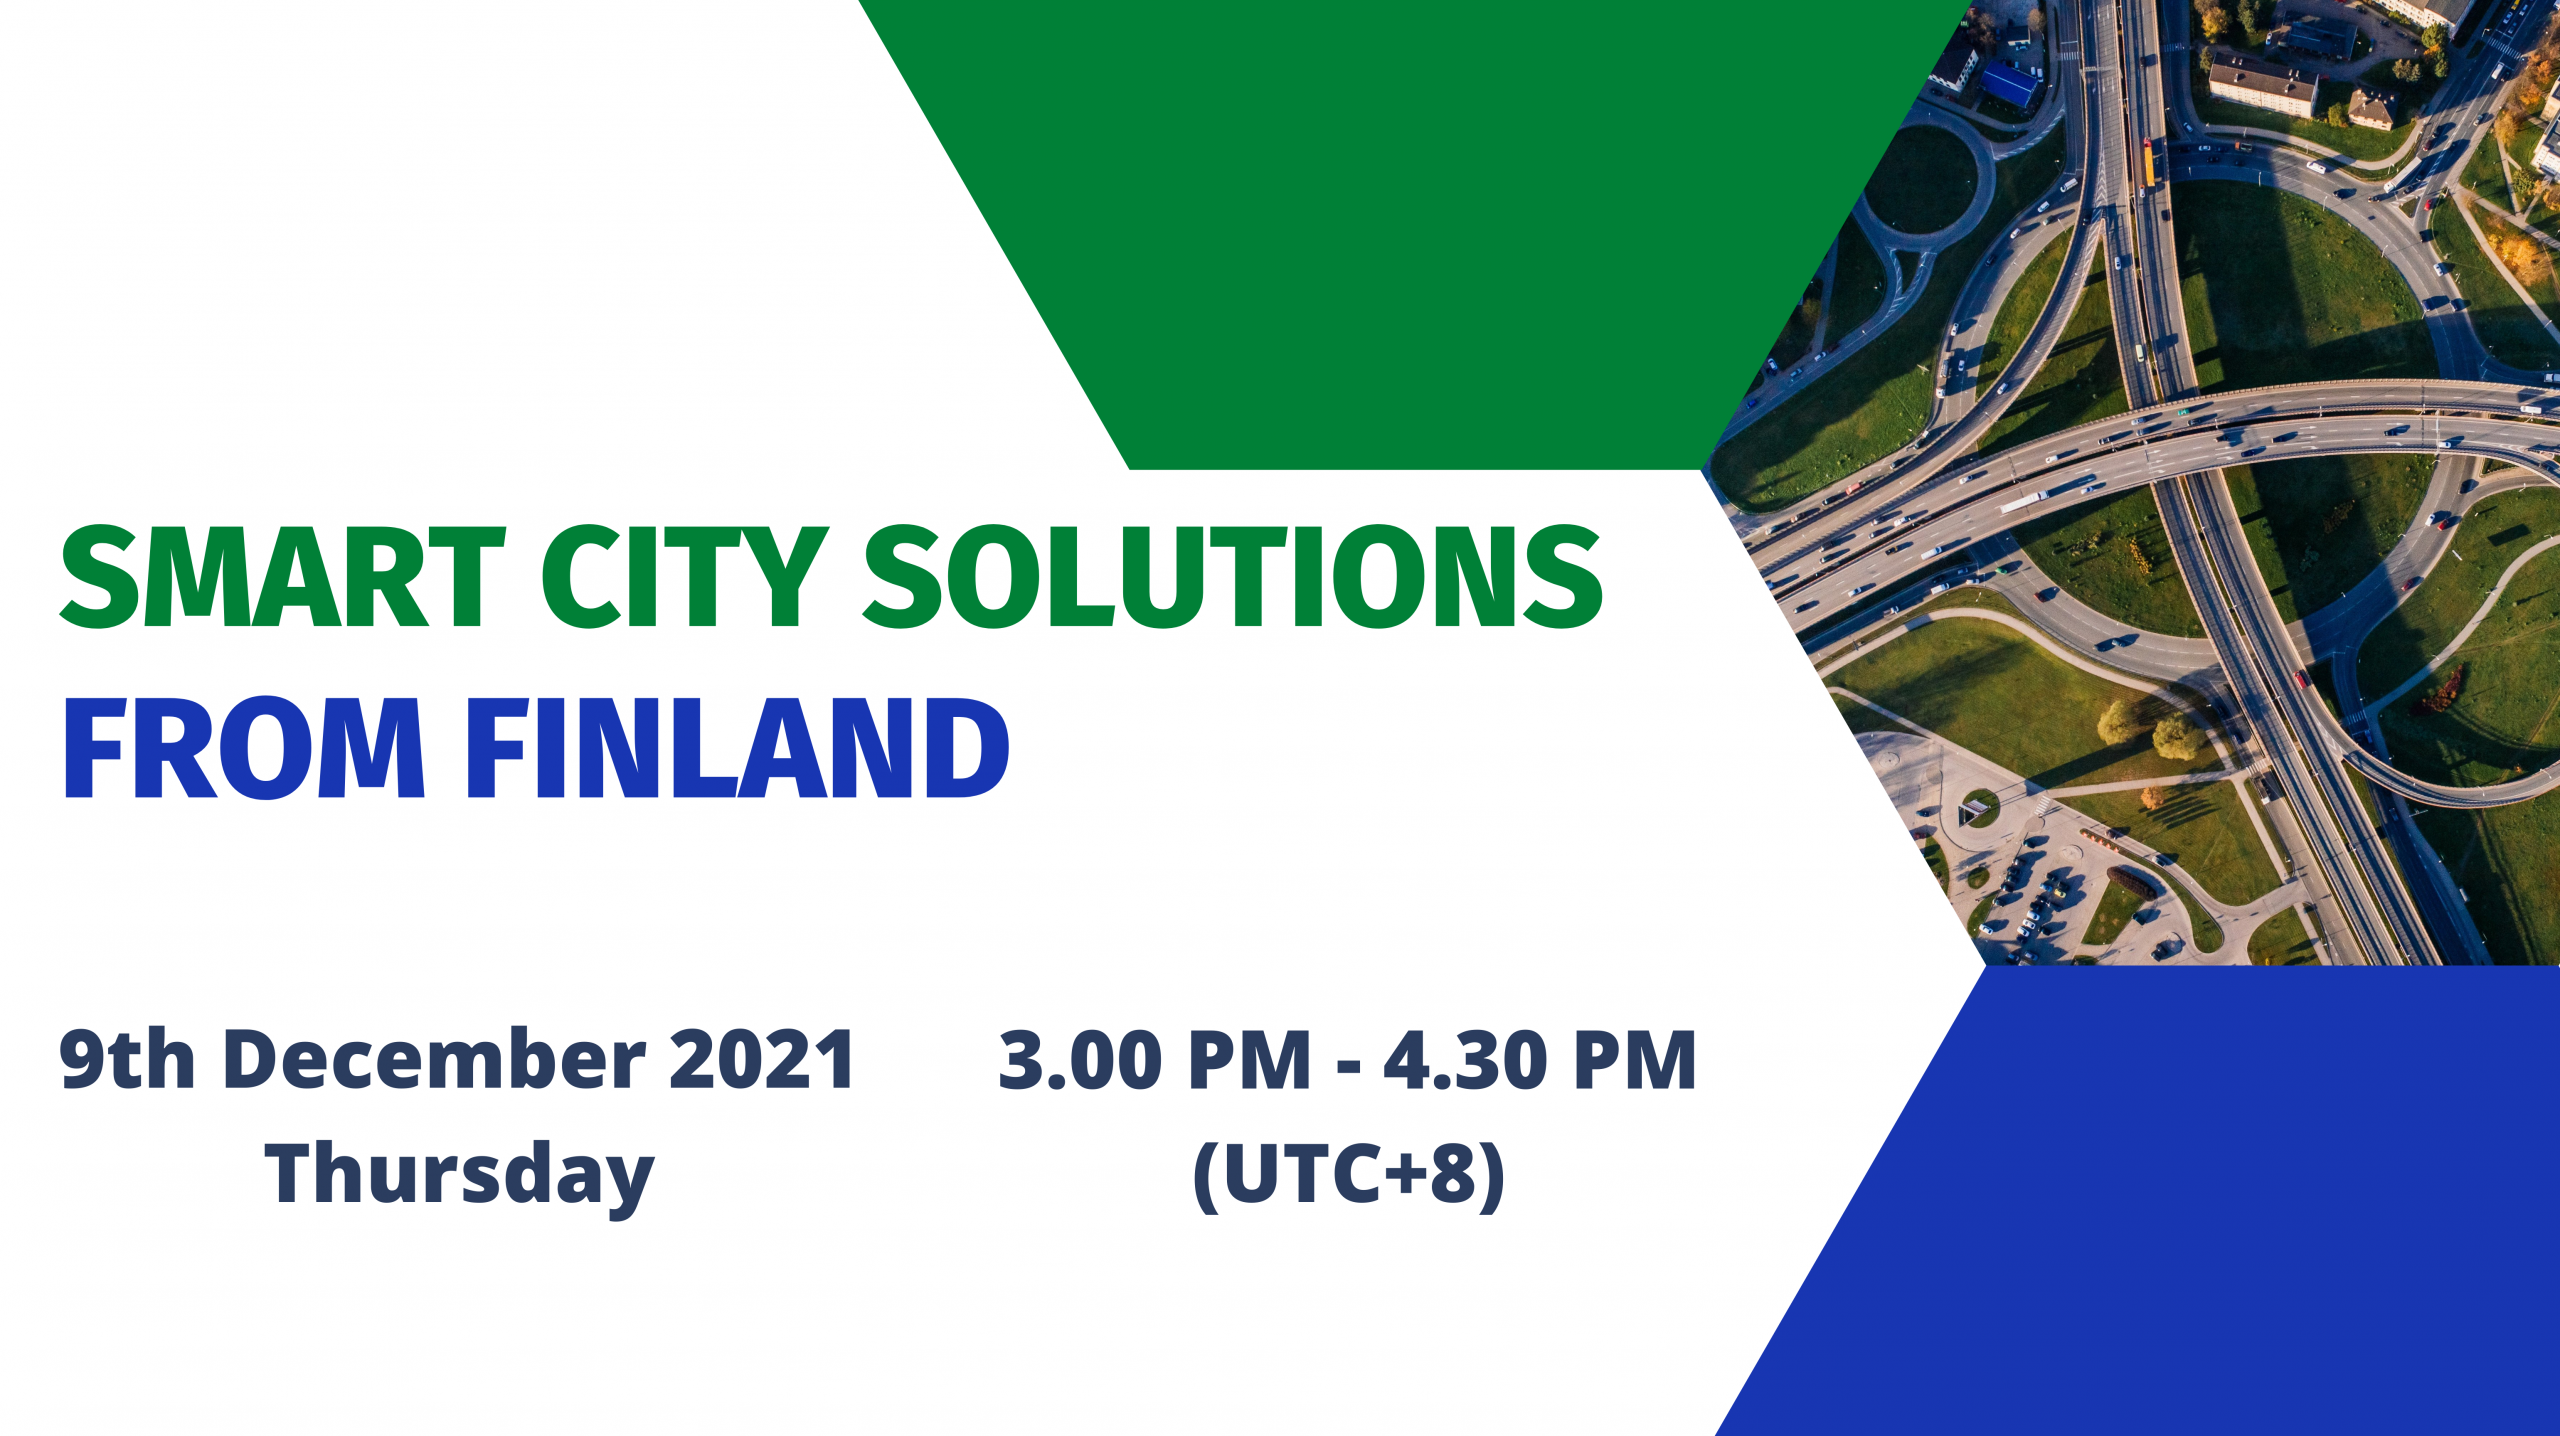 Smart City Solutions From Finland